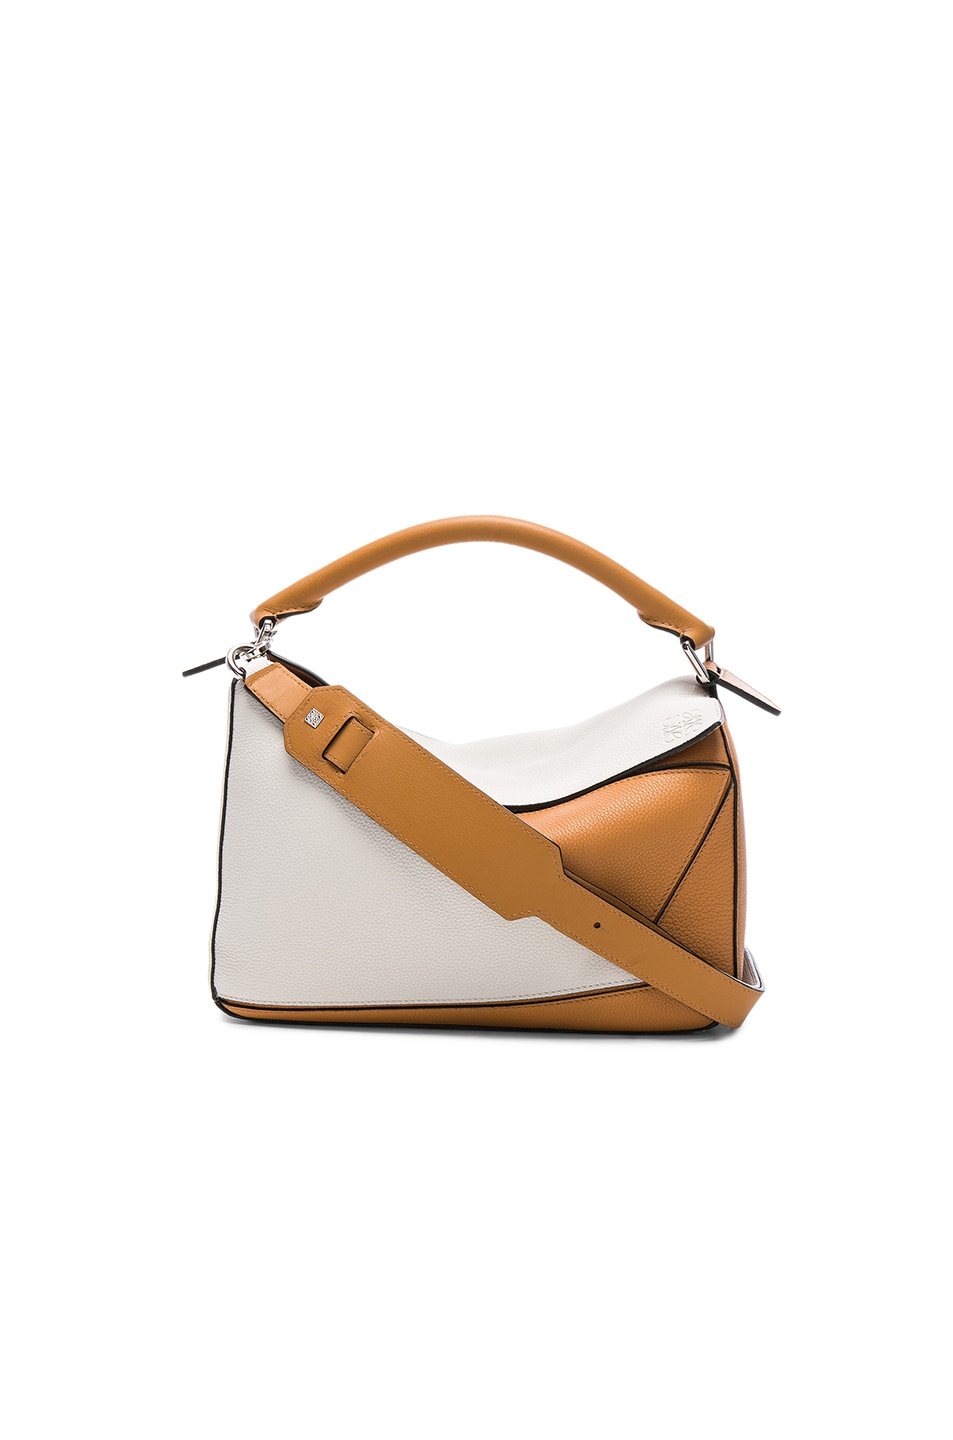 Image 1 of Loewe Puzzle Bag in Soft White & Amber